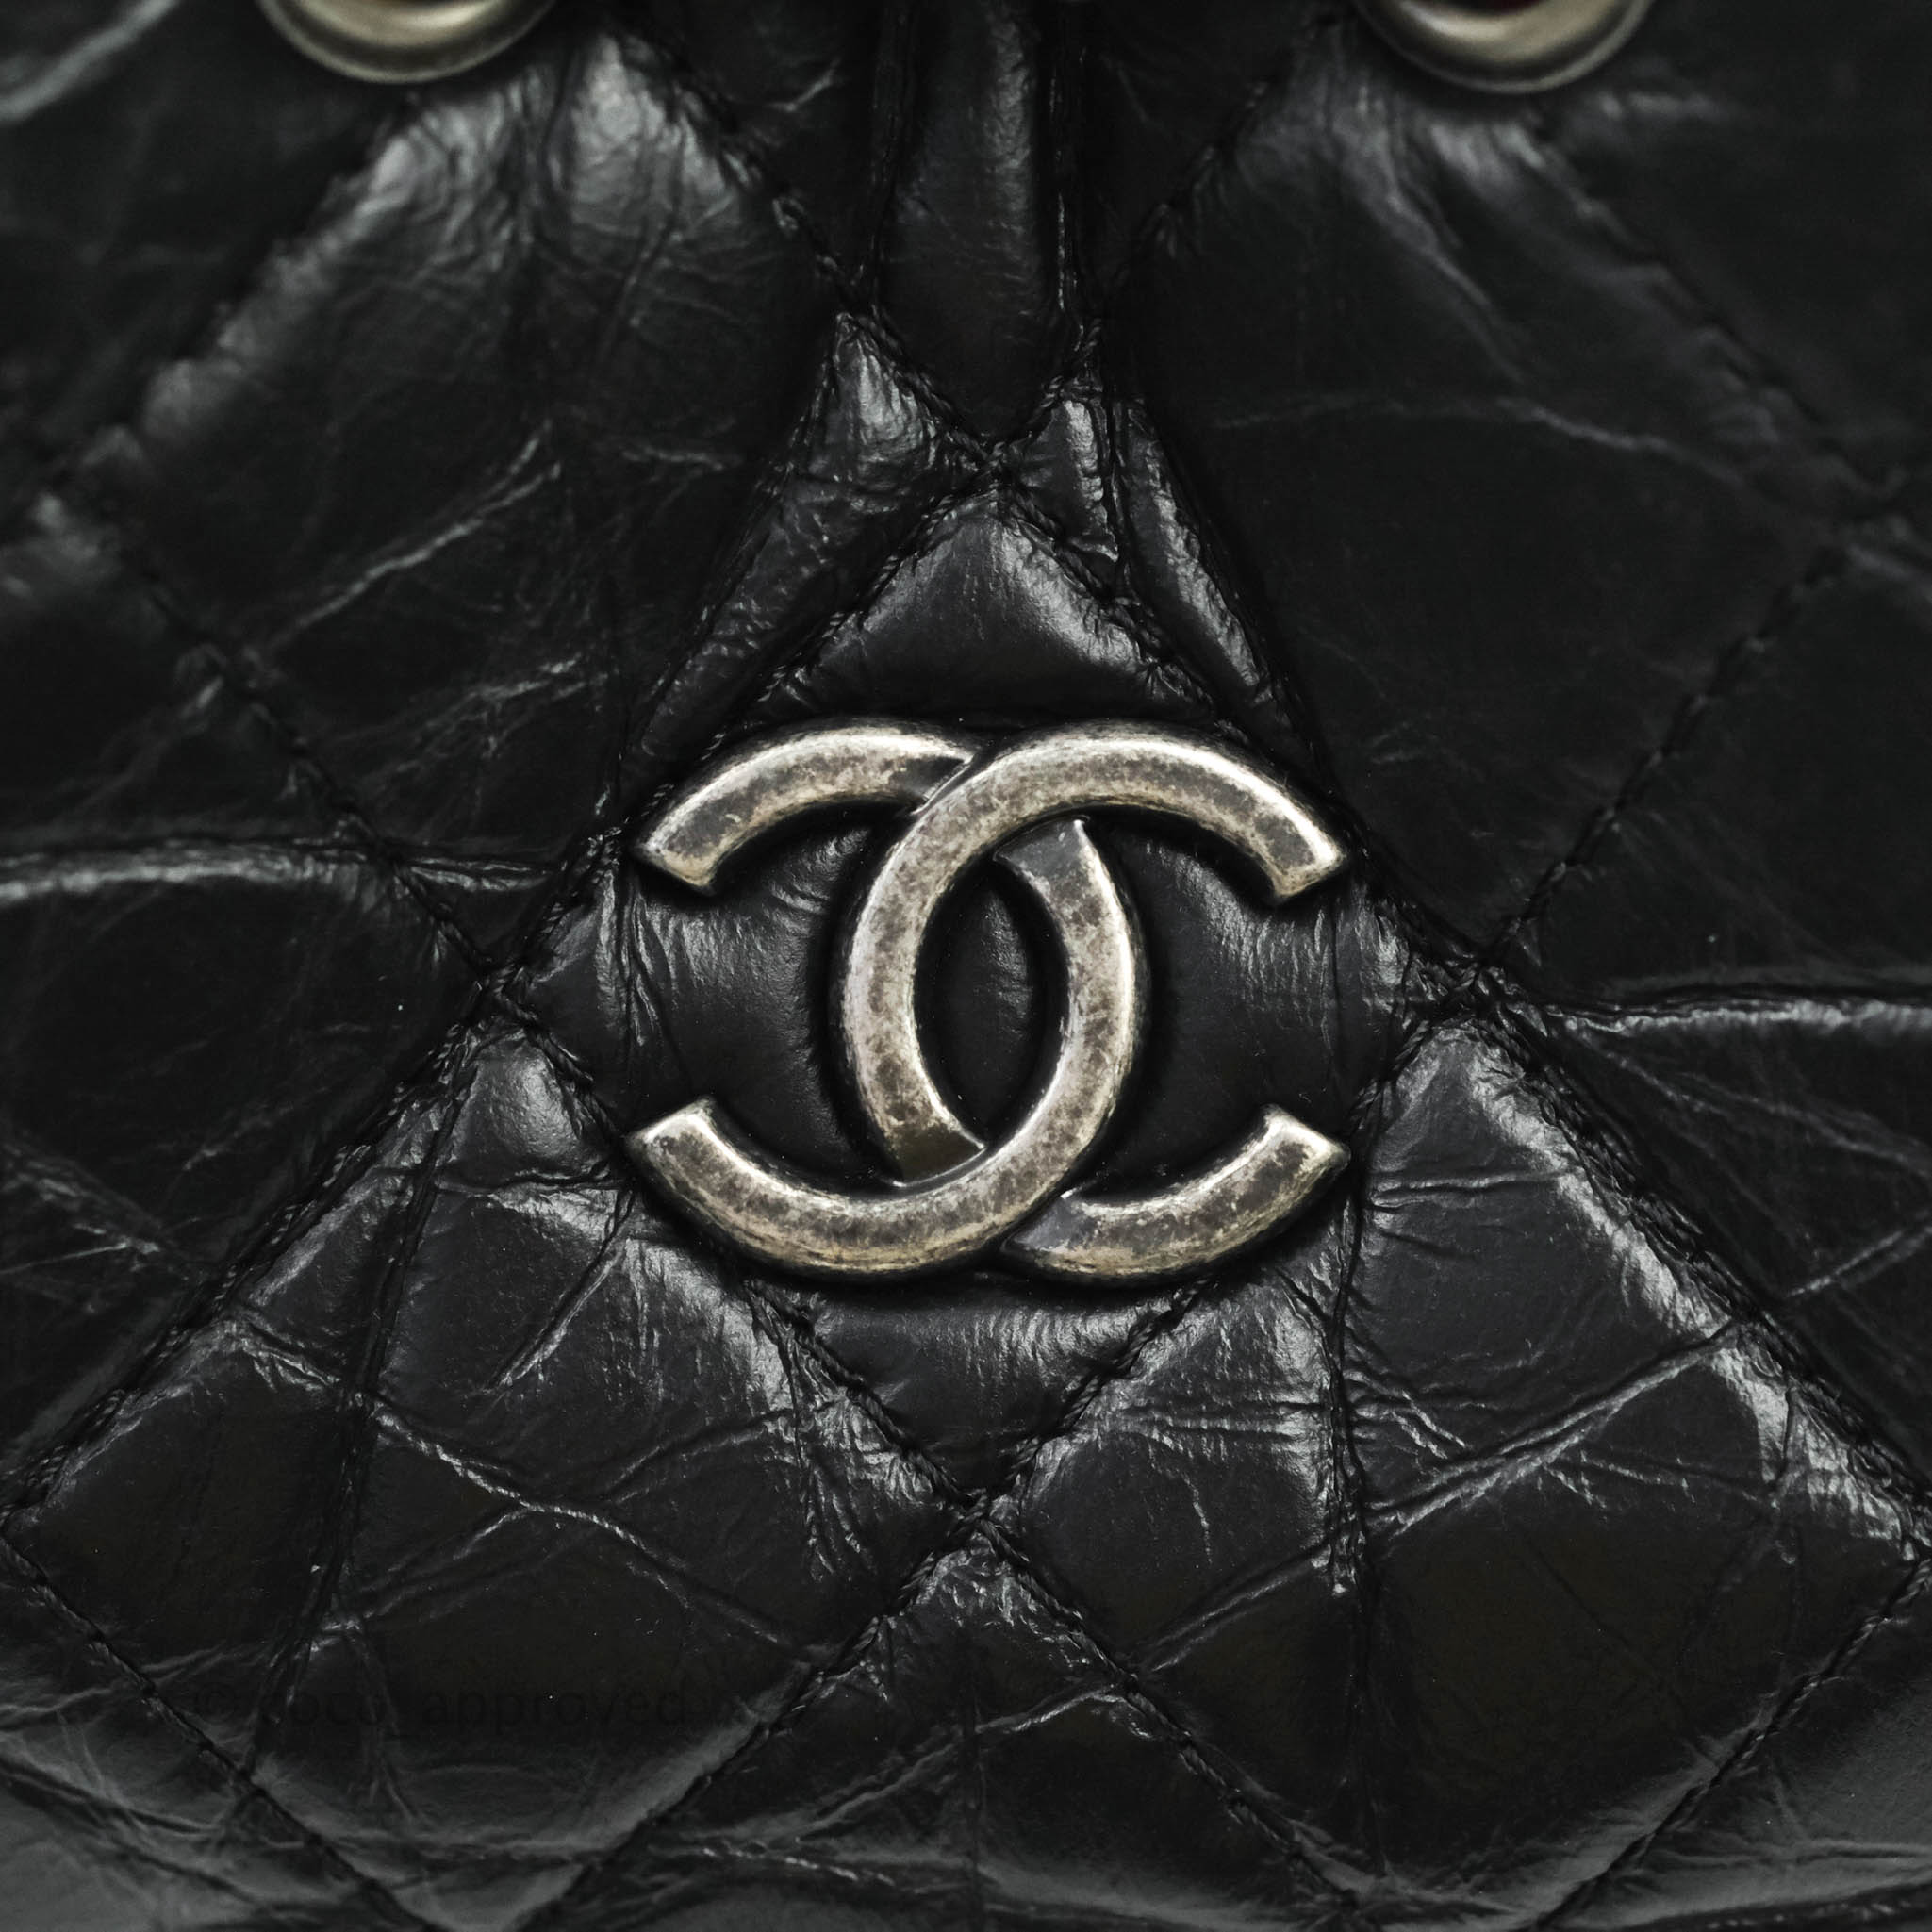 Chanel Small Chevron Gabrielle Backpack Aged Calfskin Grey – Coco Approved  Studio